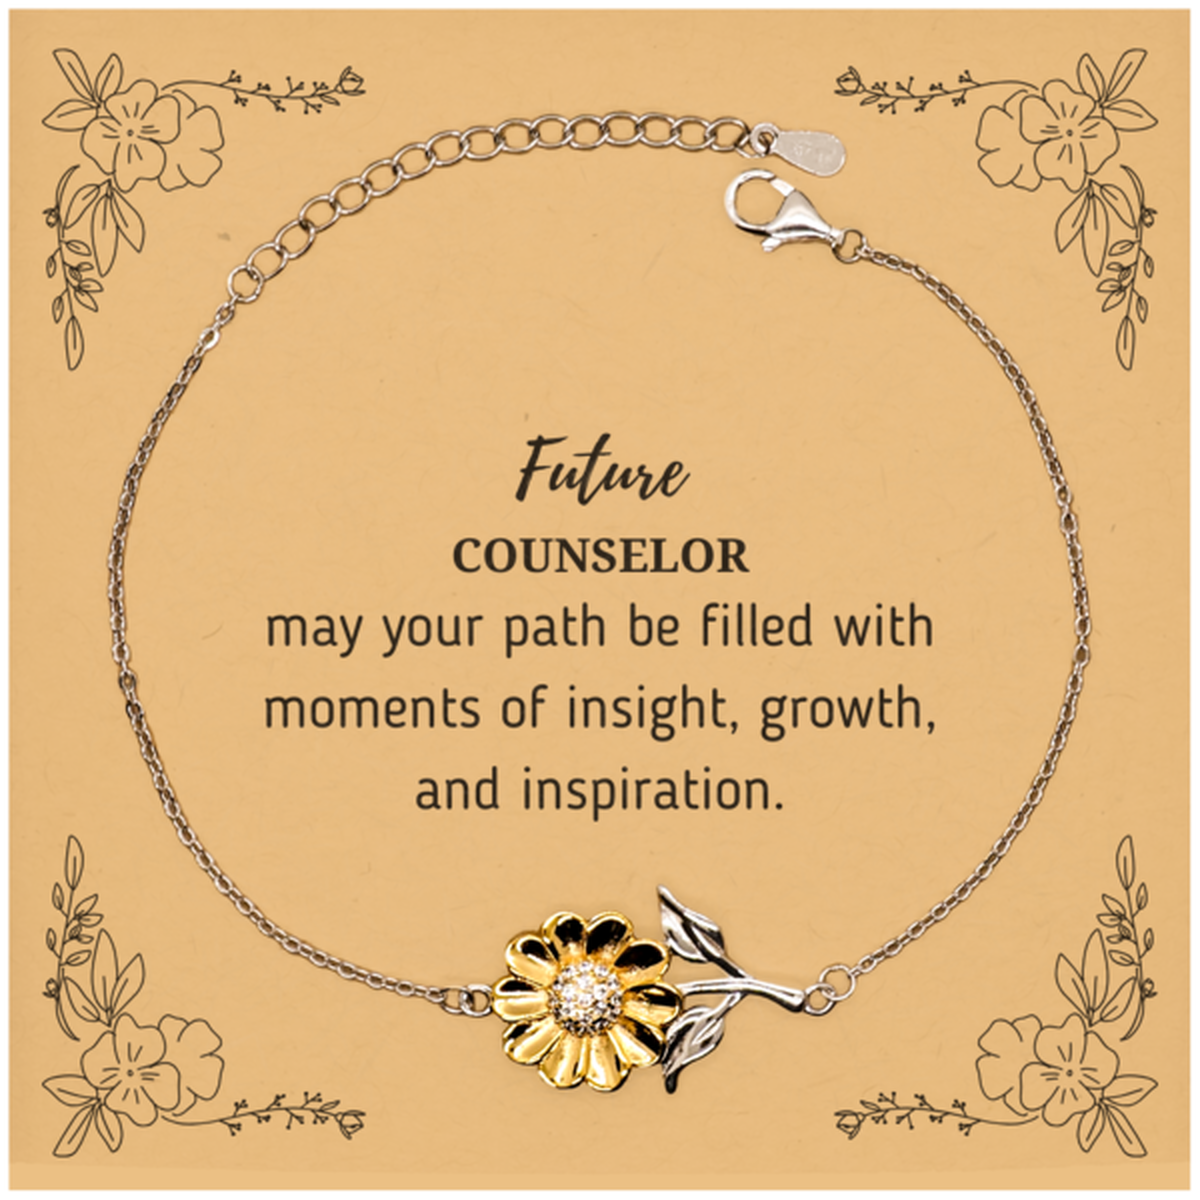 Future Counselor Gifts, May your path be filled with moments of insight, Graduation Gifts for New Counselor, Christmas Unique Sunflower Bracelet For Men, Women, Friends